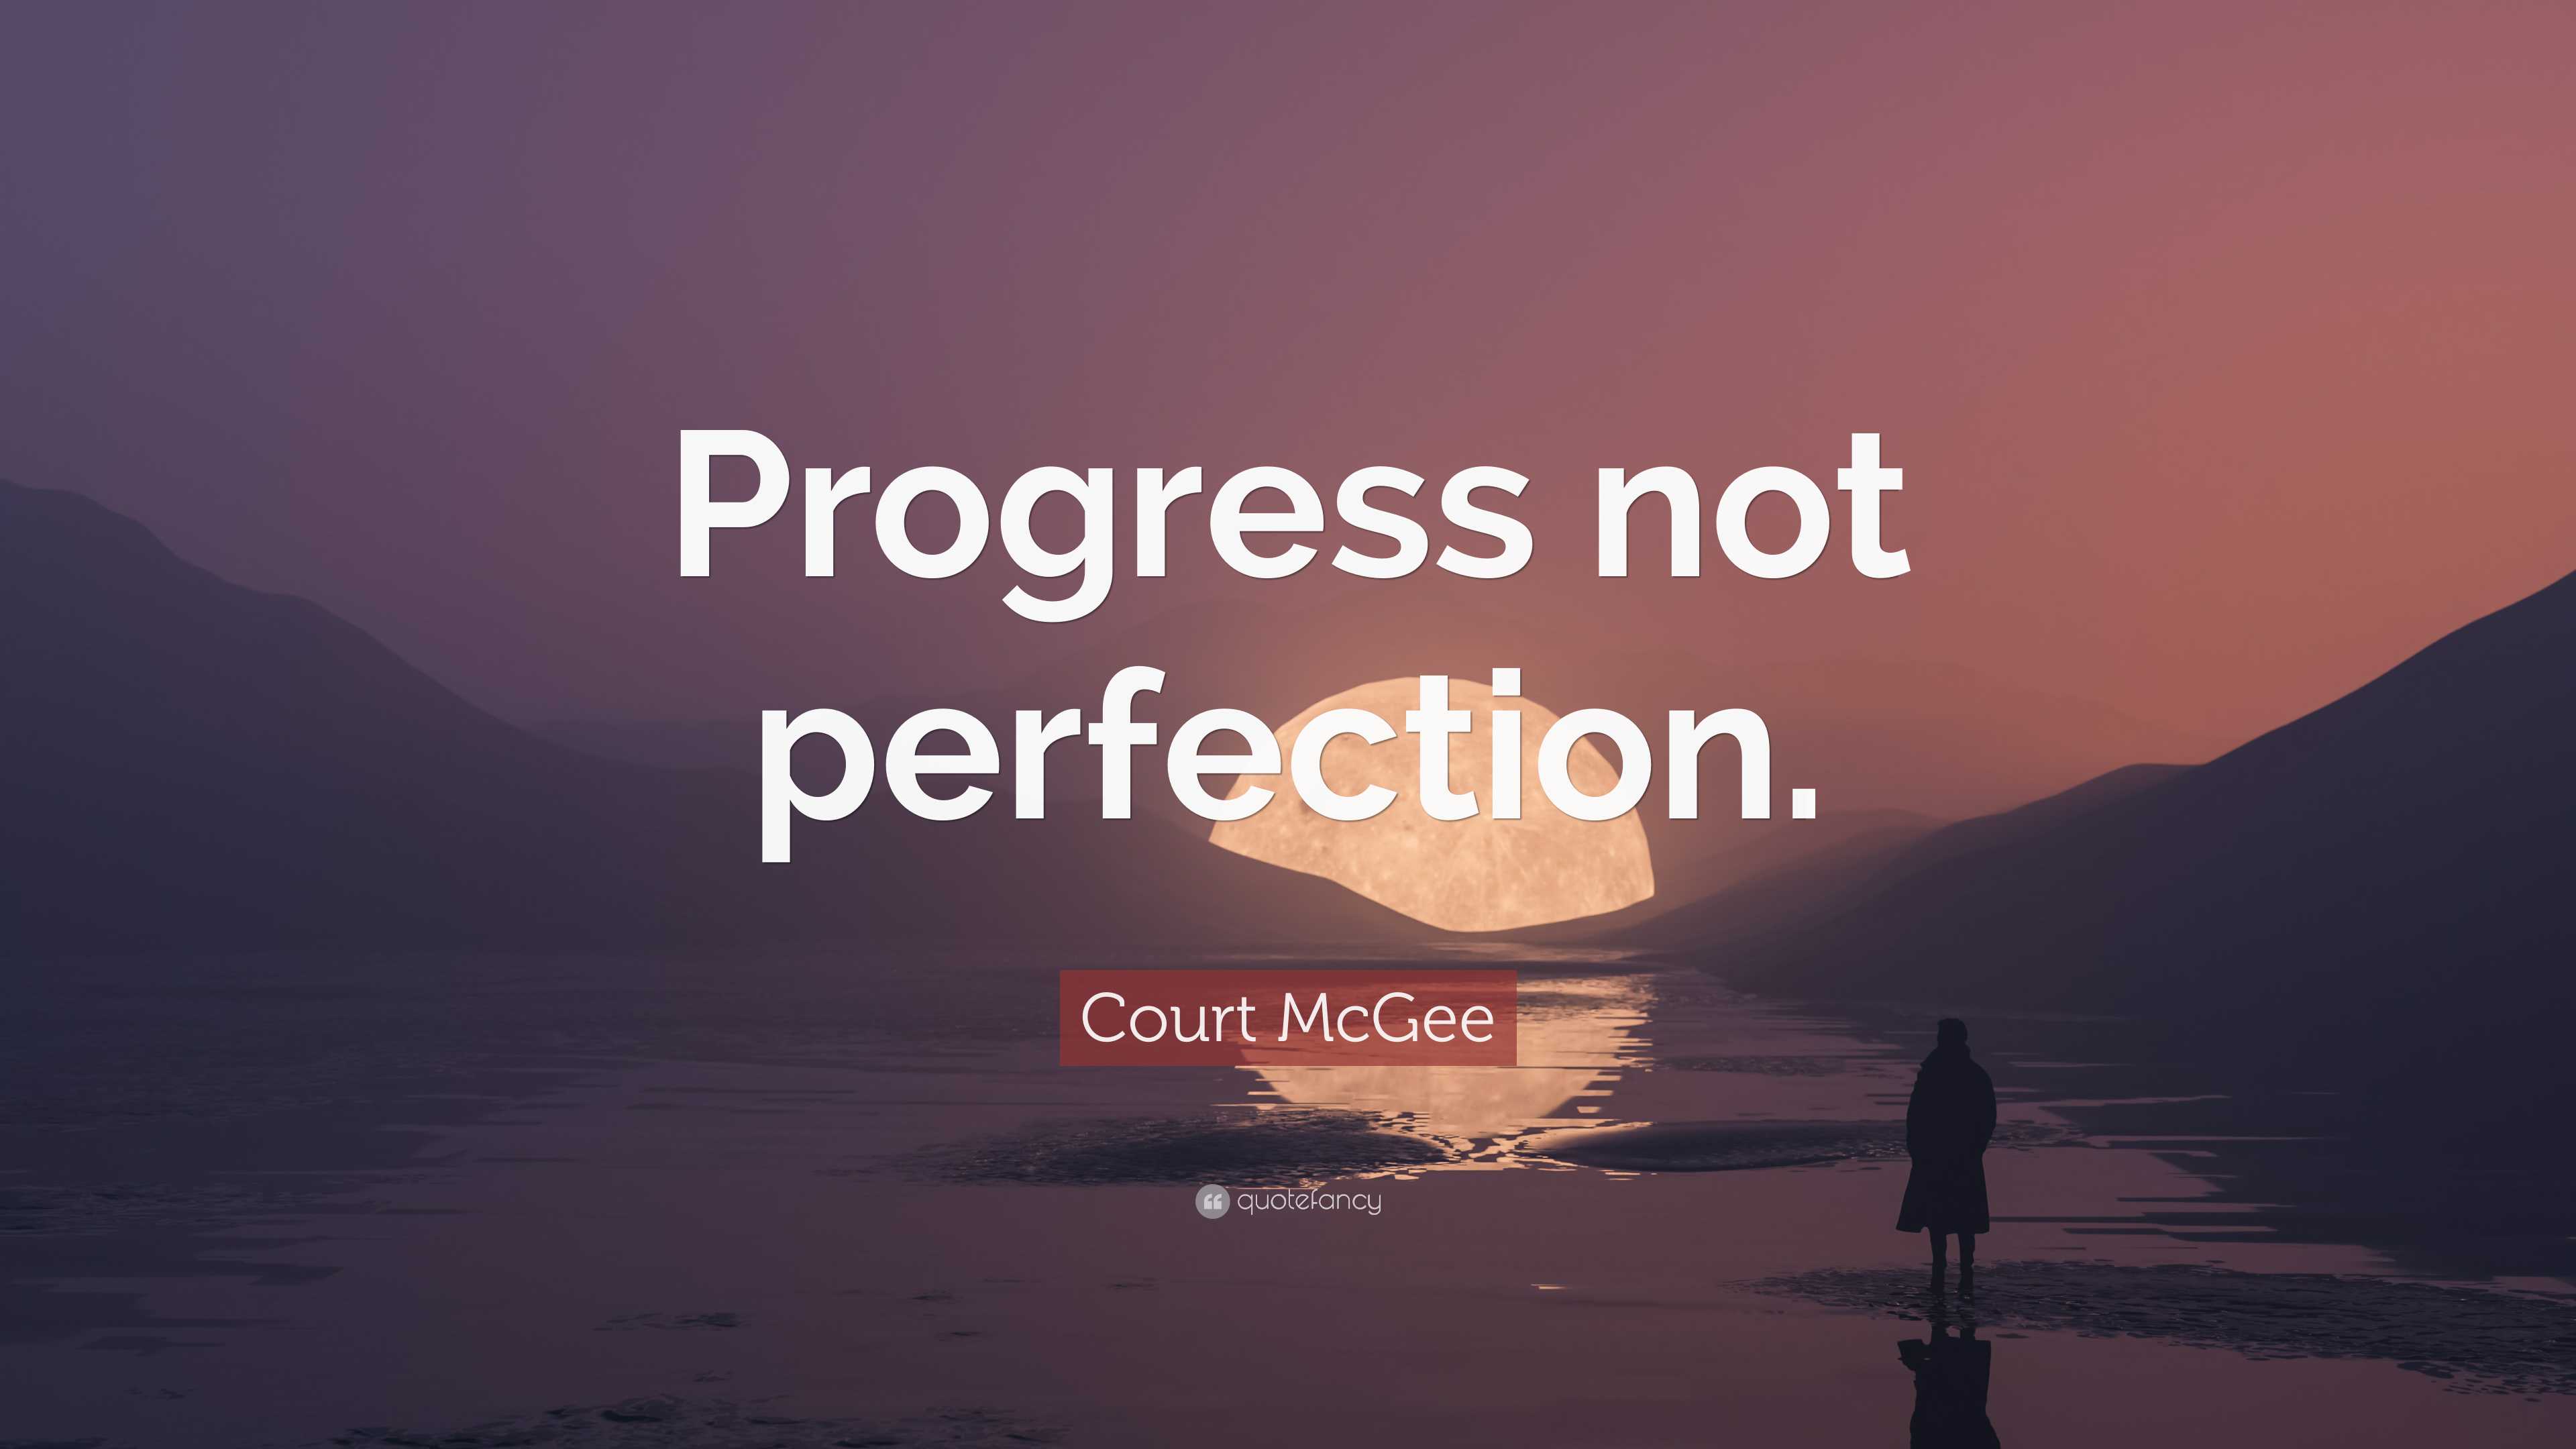 Court McGee Quote: “Progress not perfection.”